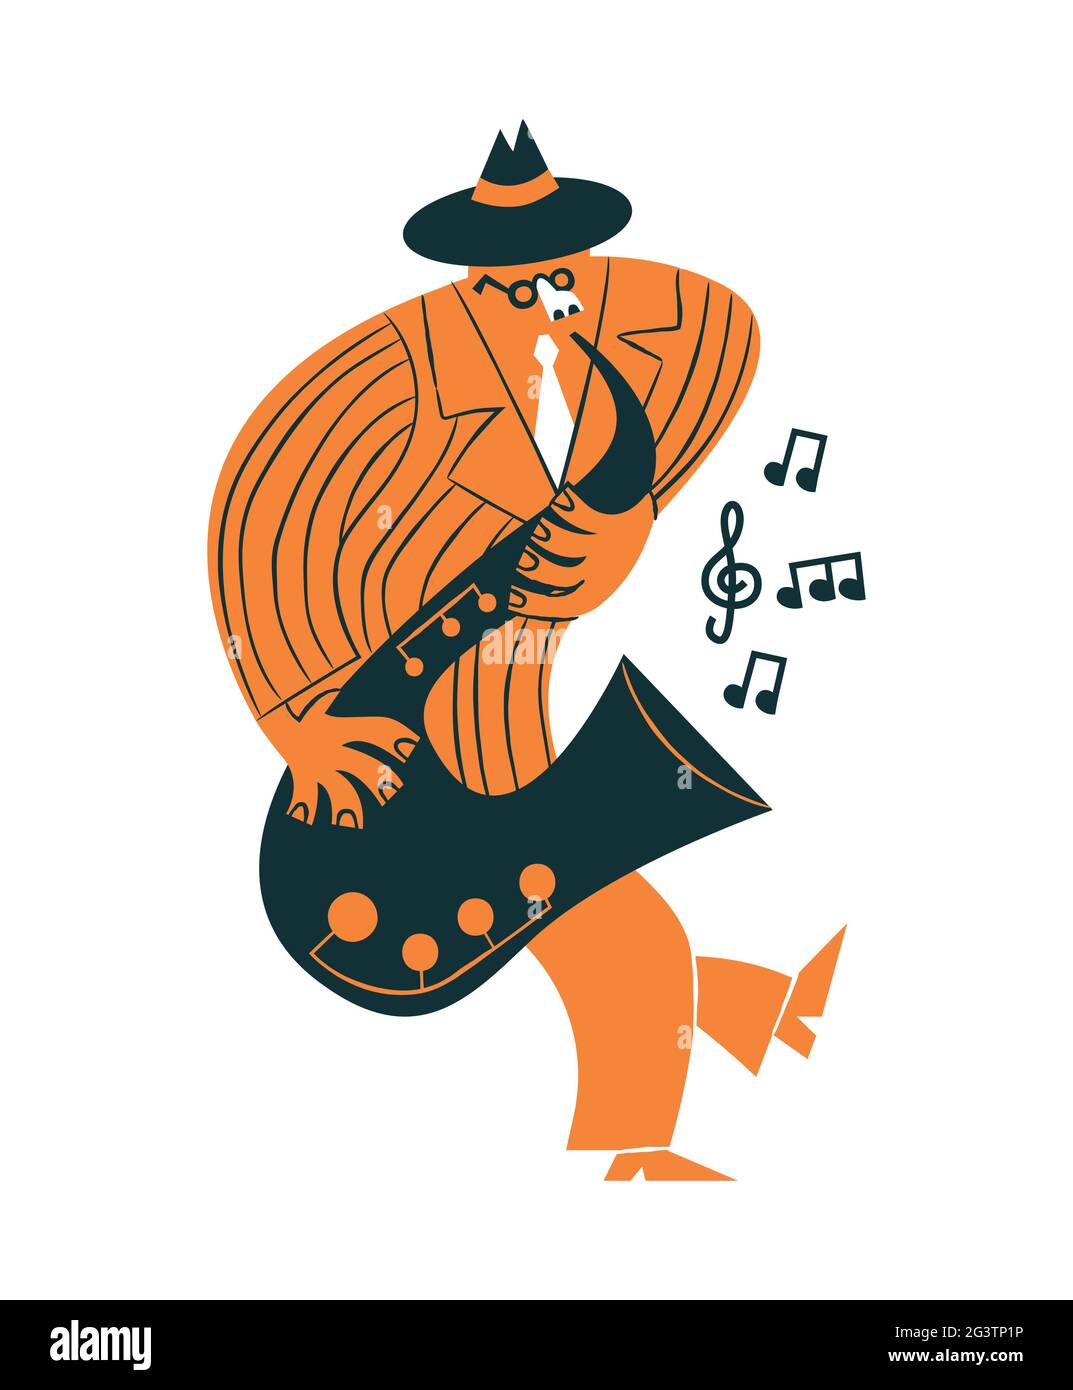 Funny jazz musician cartoon character playing saxophone musical instrument on isolated background. Vintage hand drawn saxophonist man. Stock Vector